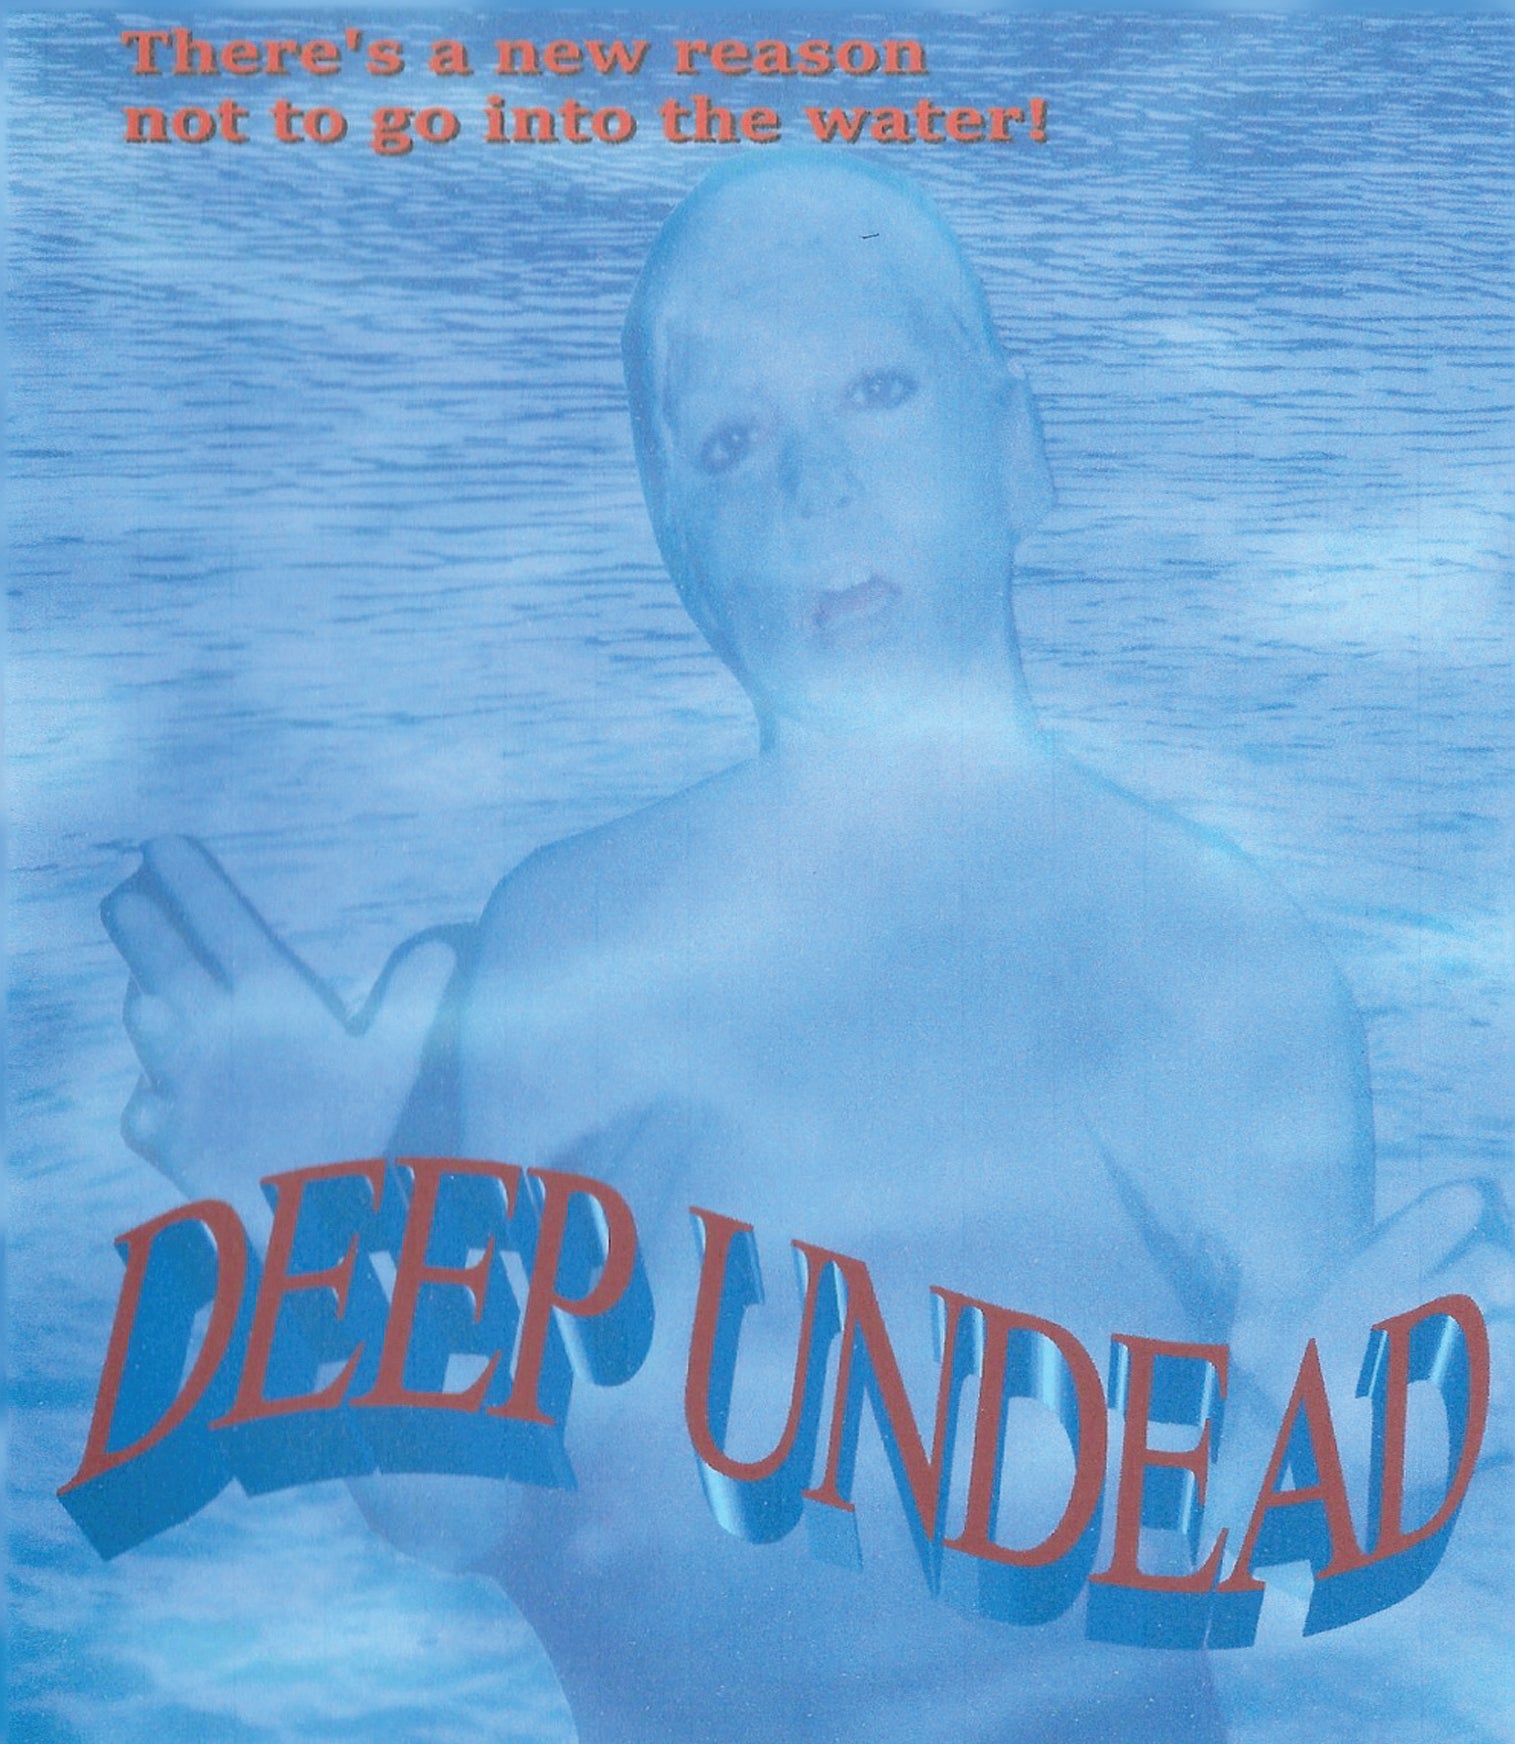 DEEP UNDEAD (LIMITED EDITION) BLU-RAY